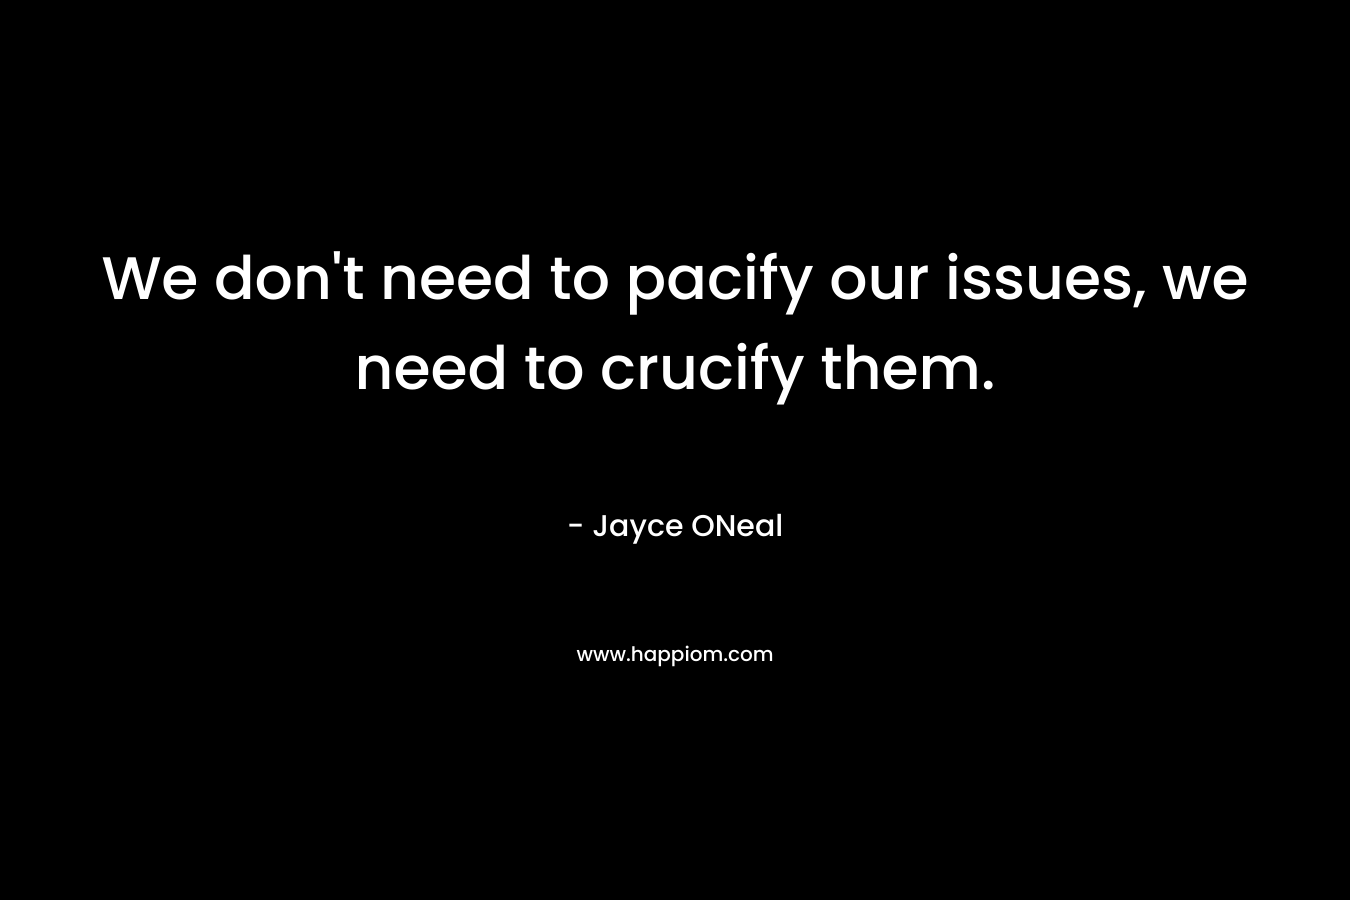 We don’t need to pacify our issues, we need to crucify them. – Jayce ONeal